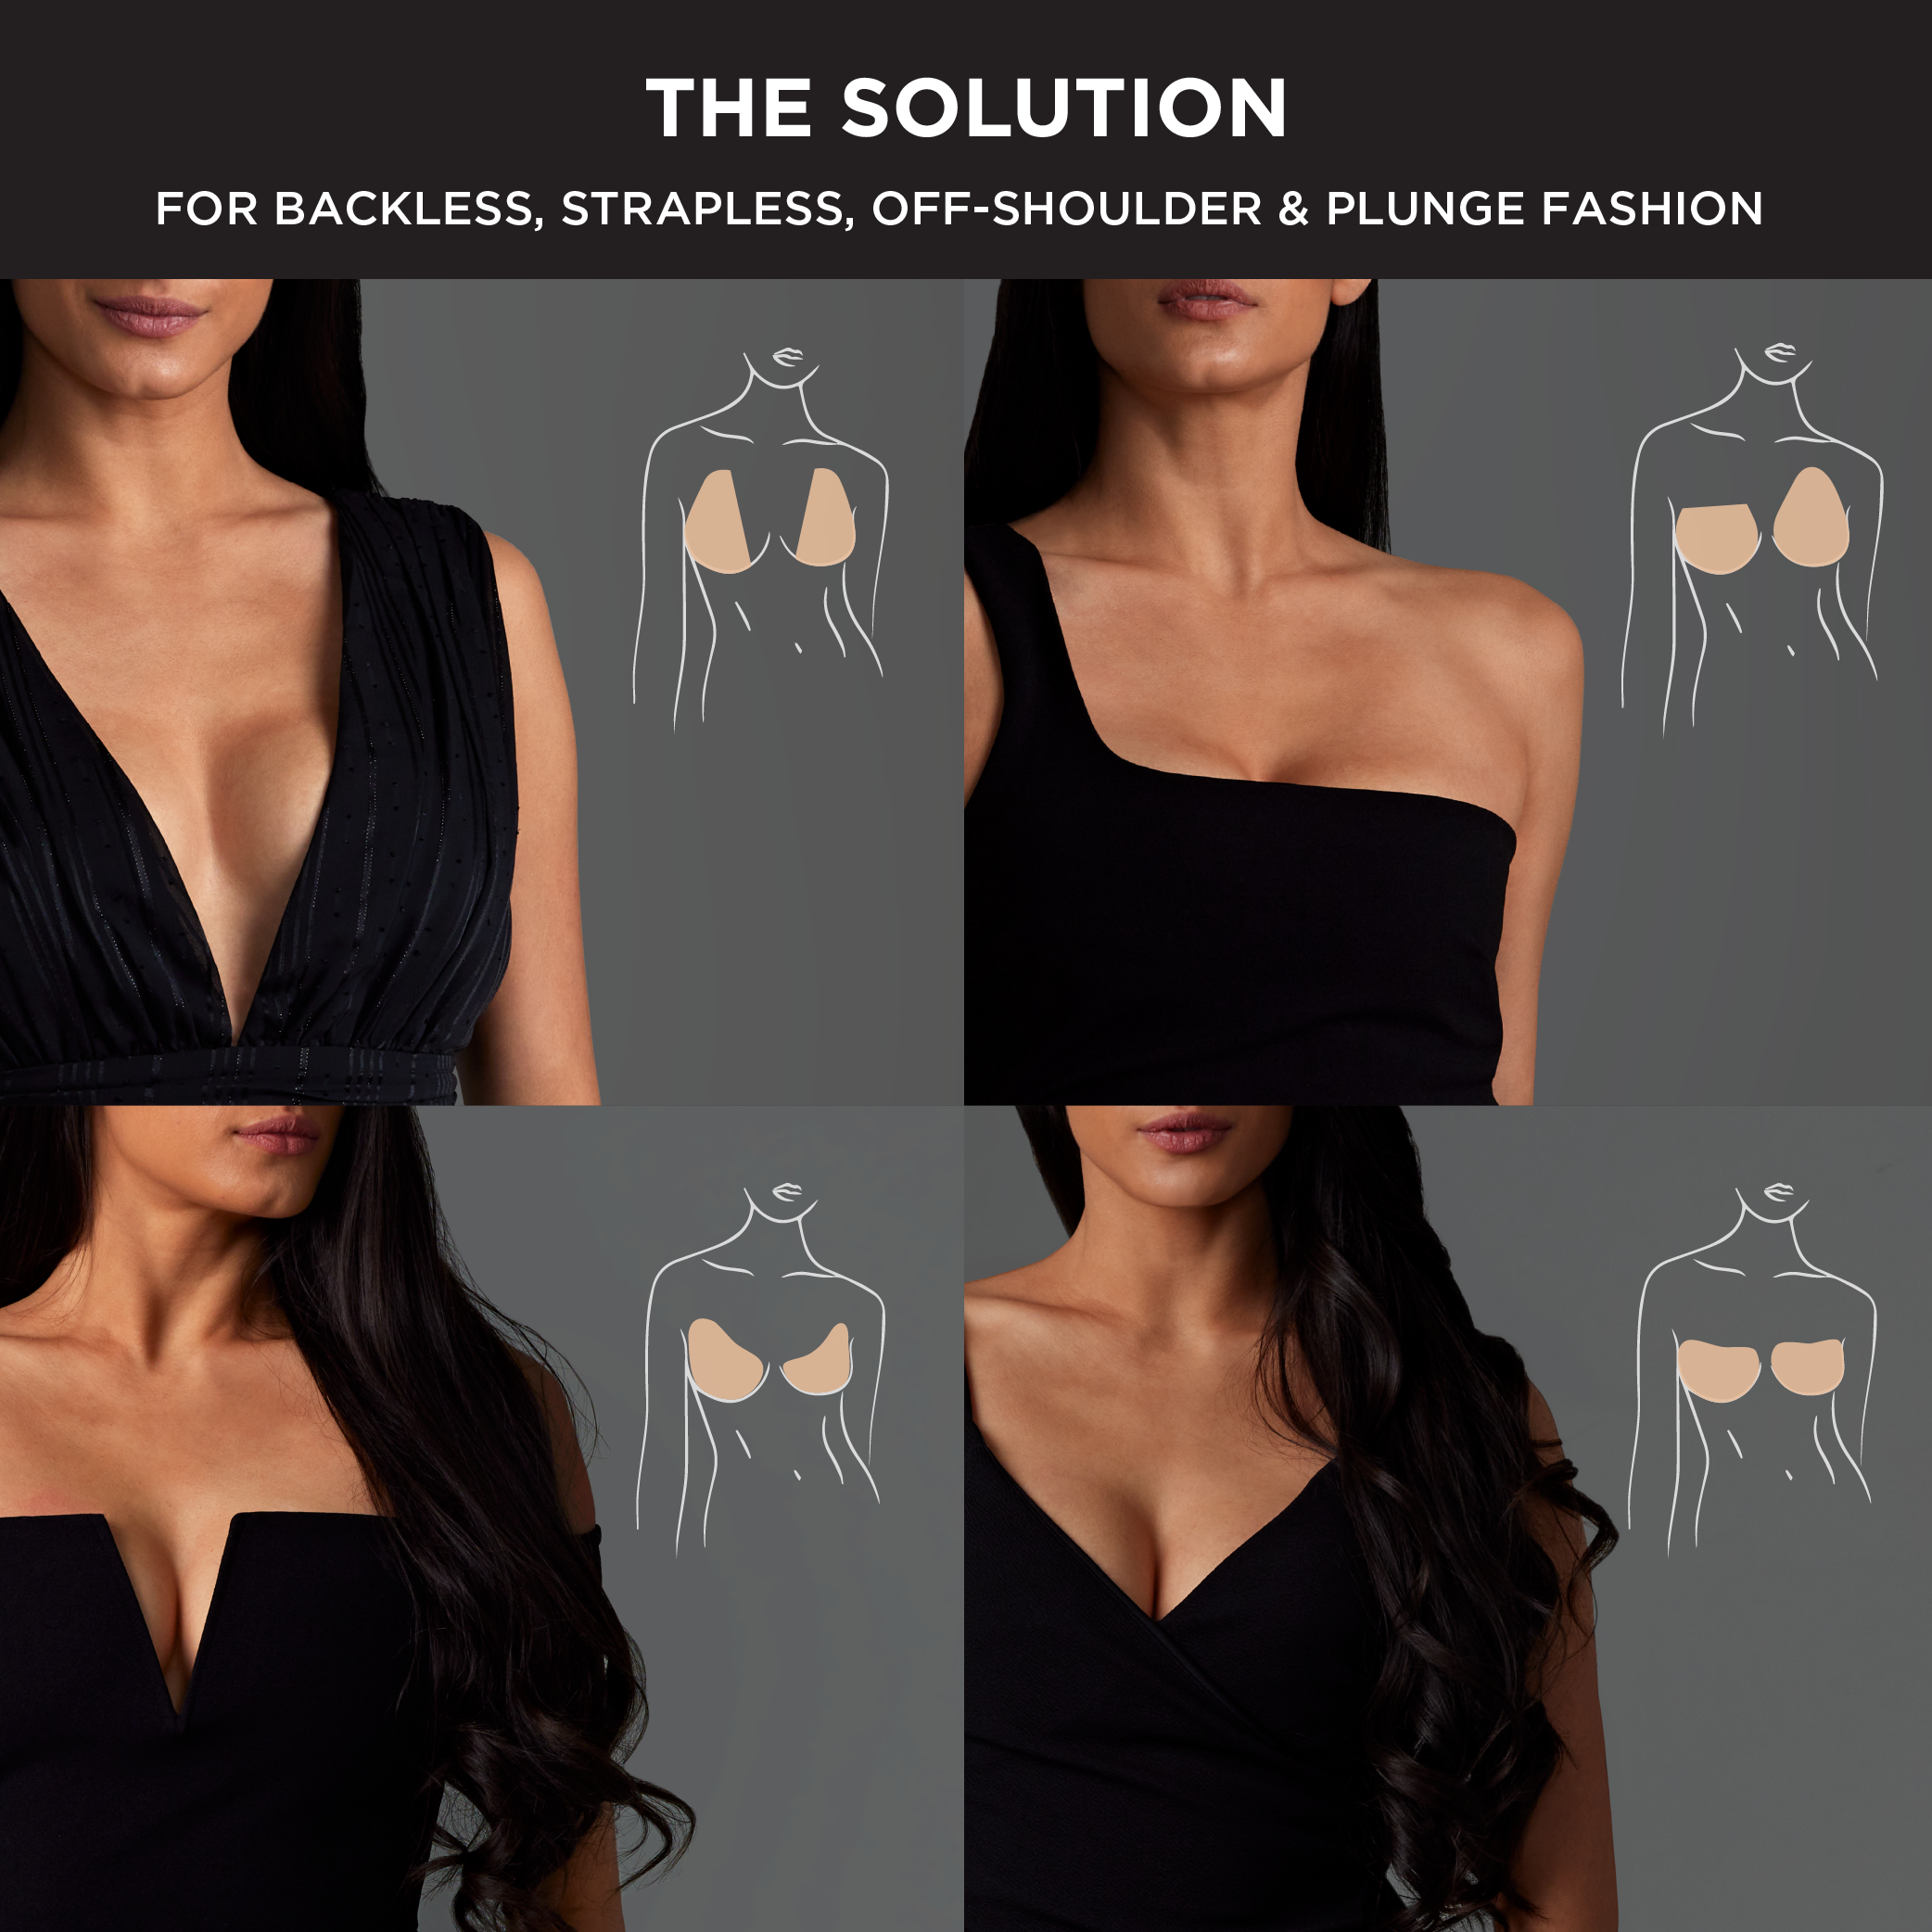 Boob Tape for Strapless Dress. Looking for a solution to keep your…, by  Classy Sassy Styled